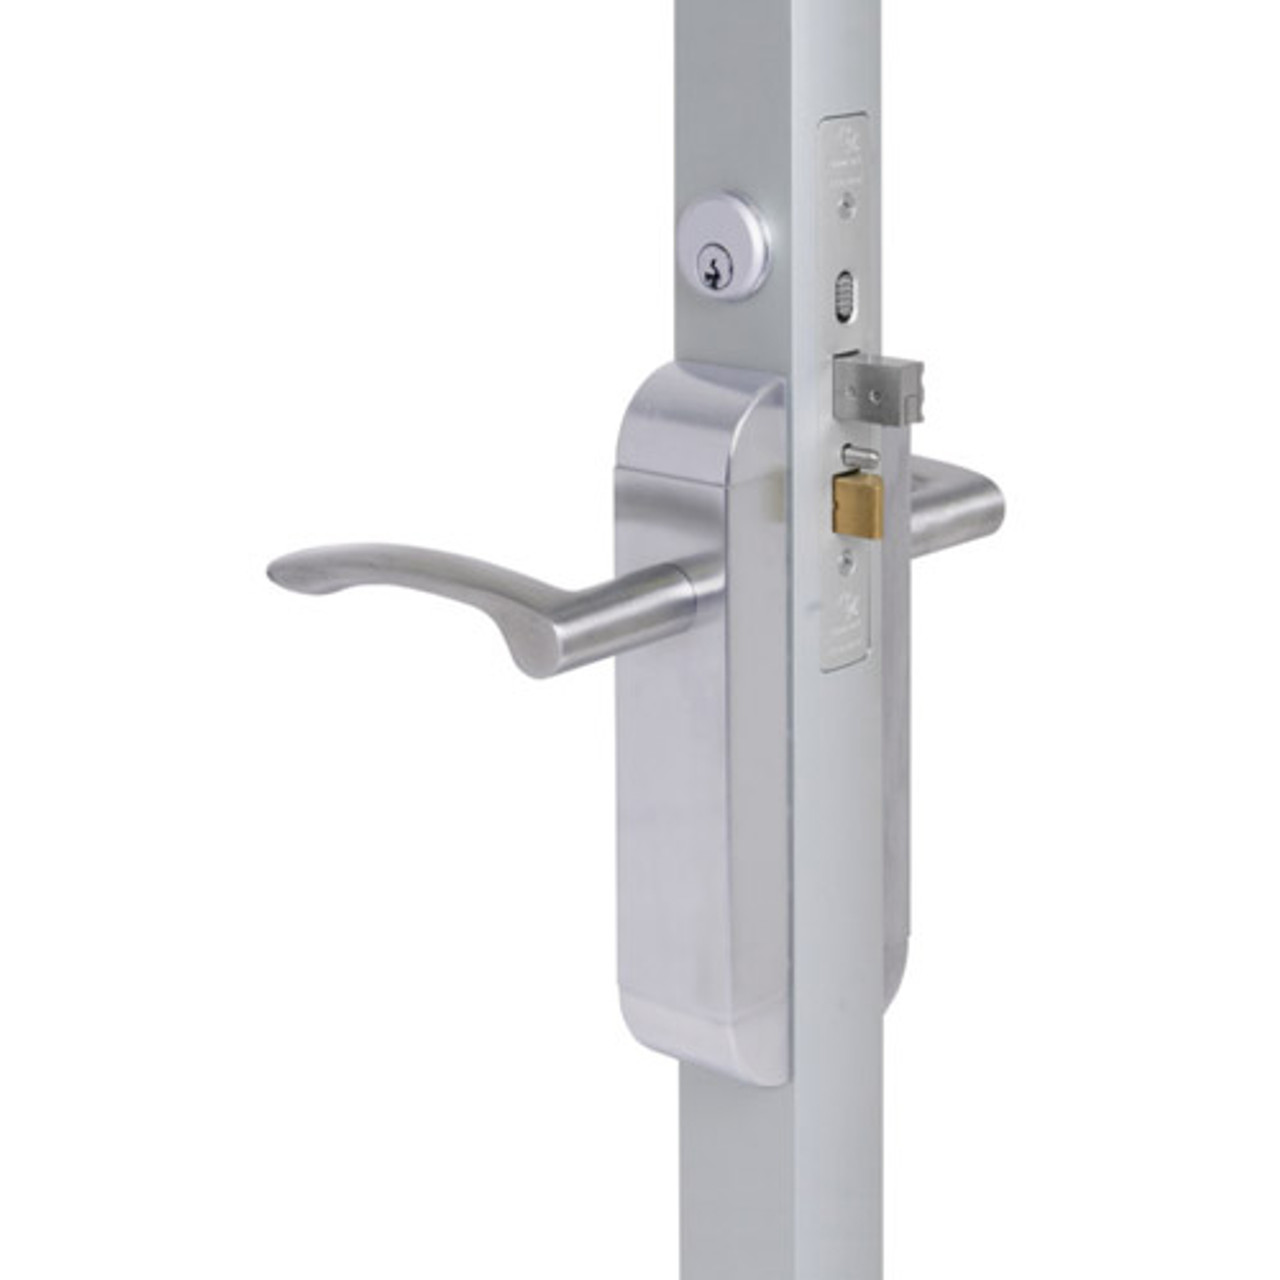 2290-311-303-32 Adams Rite Dual Force Interconnected 2290 series Deadlock/Deadlatch in Bright Stainless